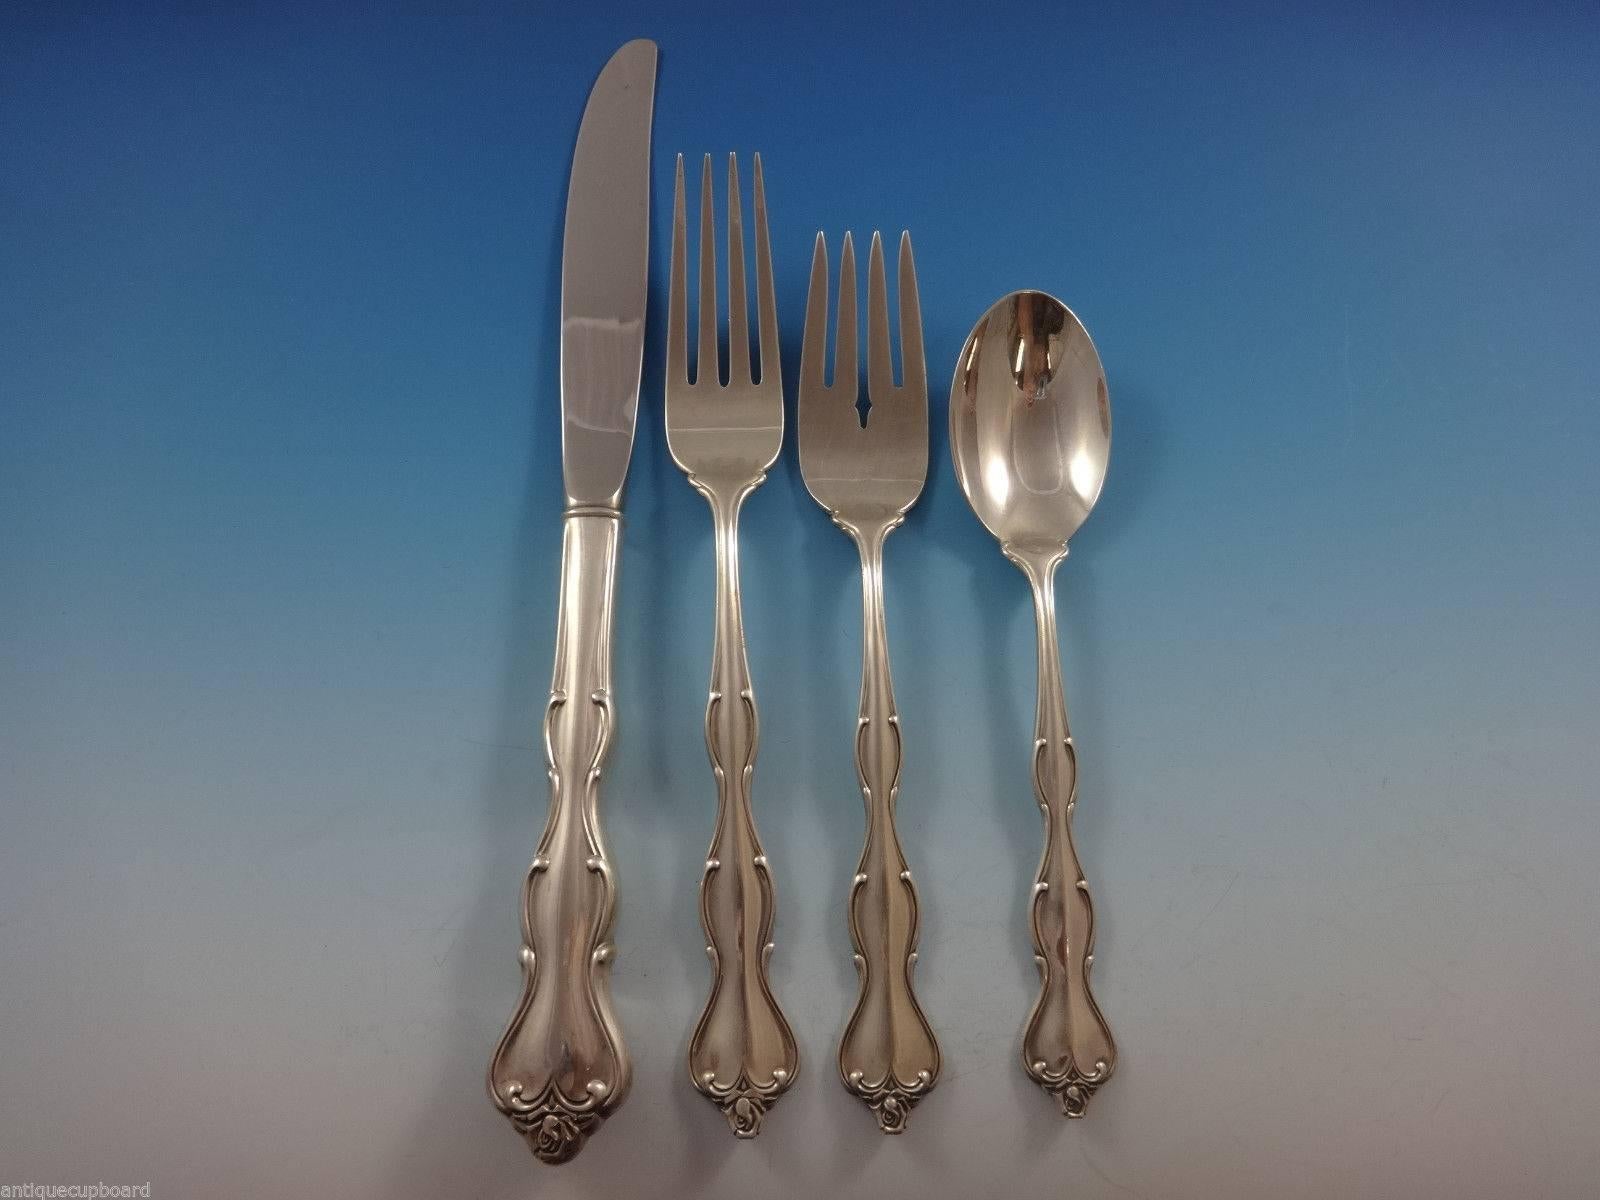 Beautiful Mademoiselle by International sterling silver flatware set of 32 pieces. This set includes:

Eight knives, 9 1/4